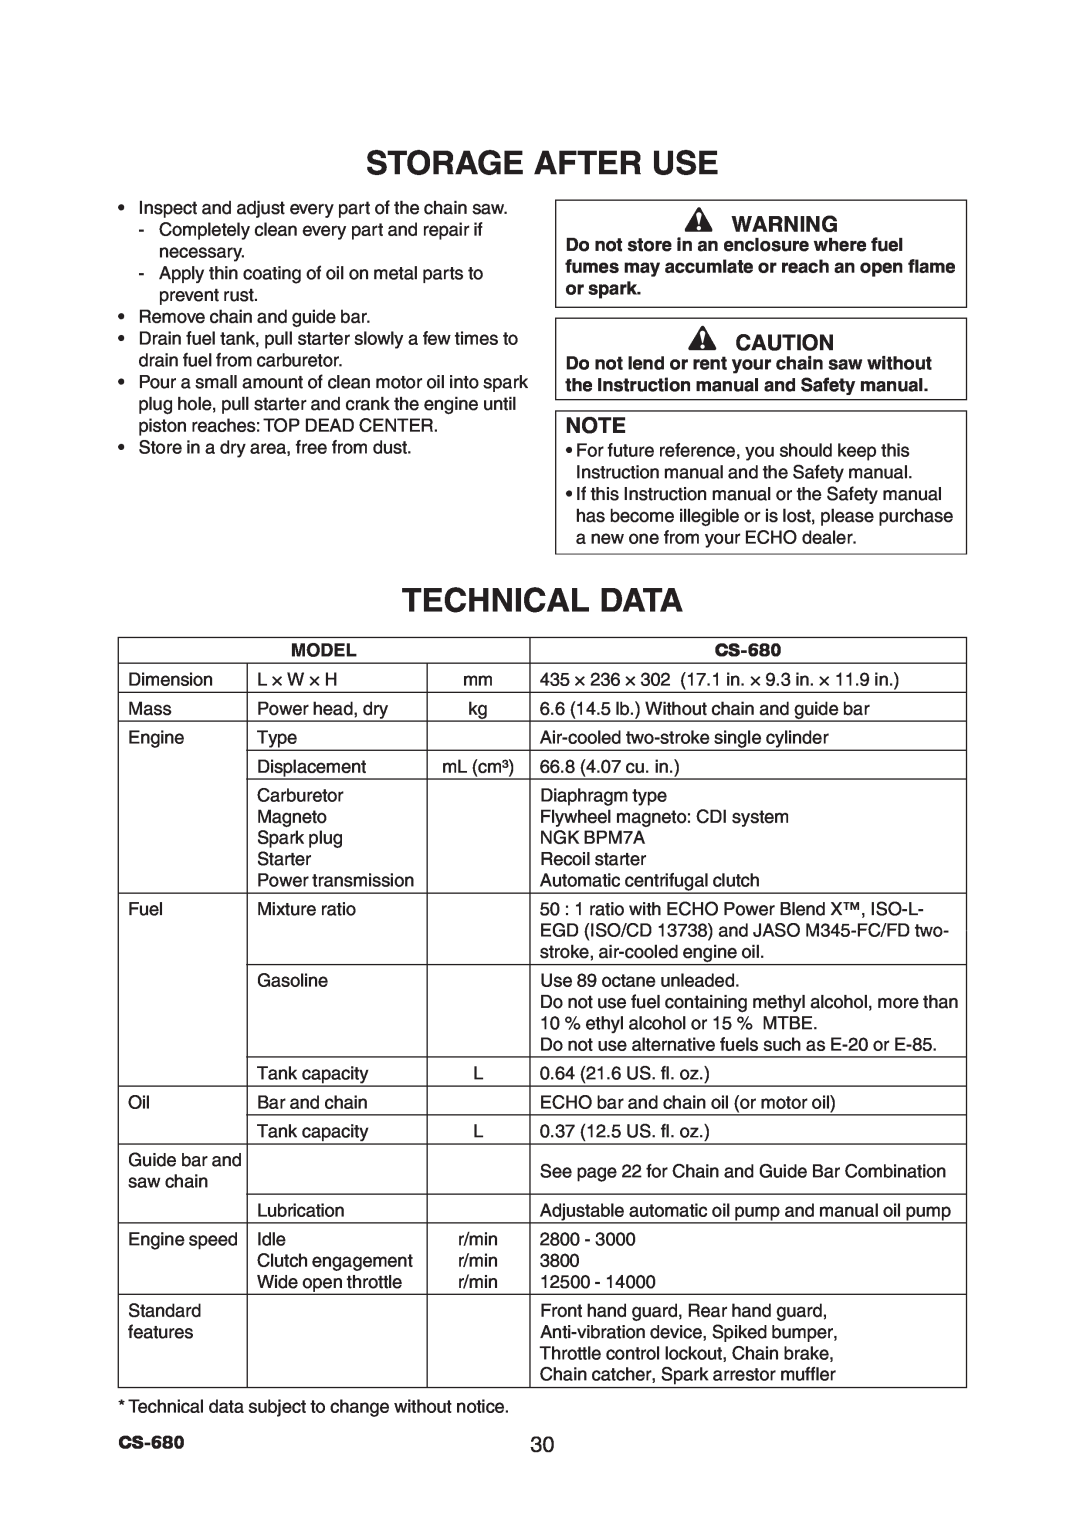 Echo CS-680 instruction manual Storage After Use, Technical Data 